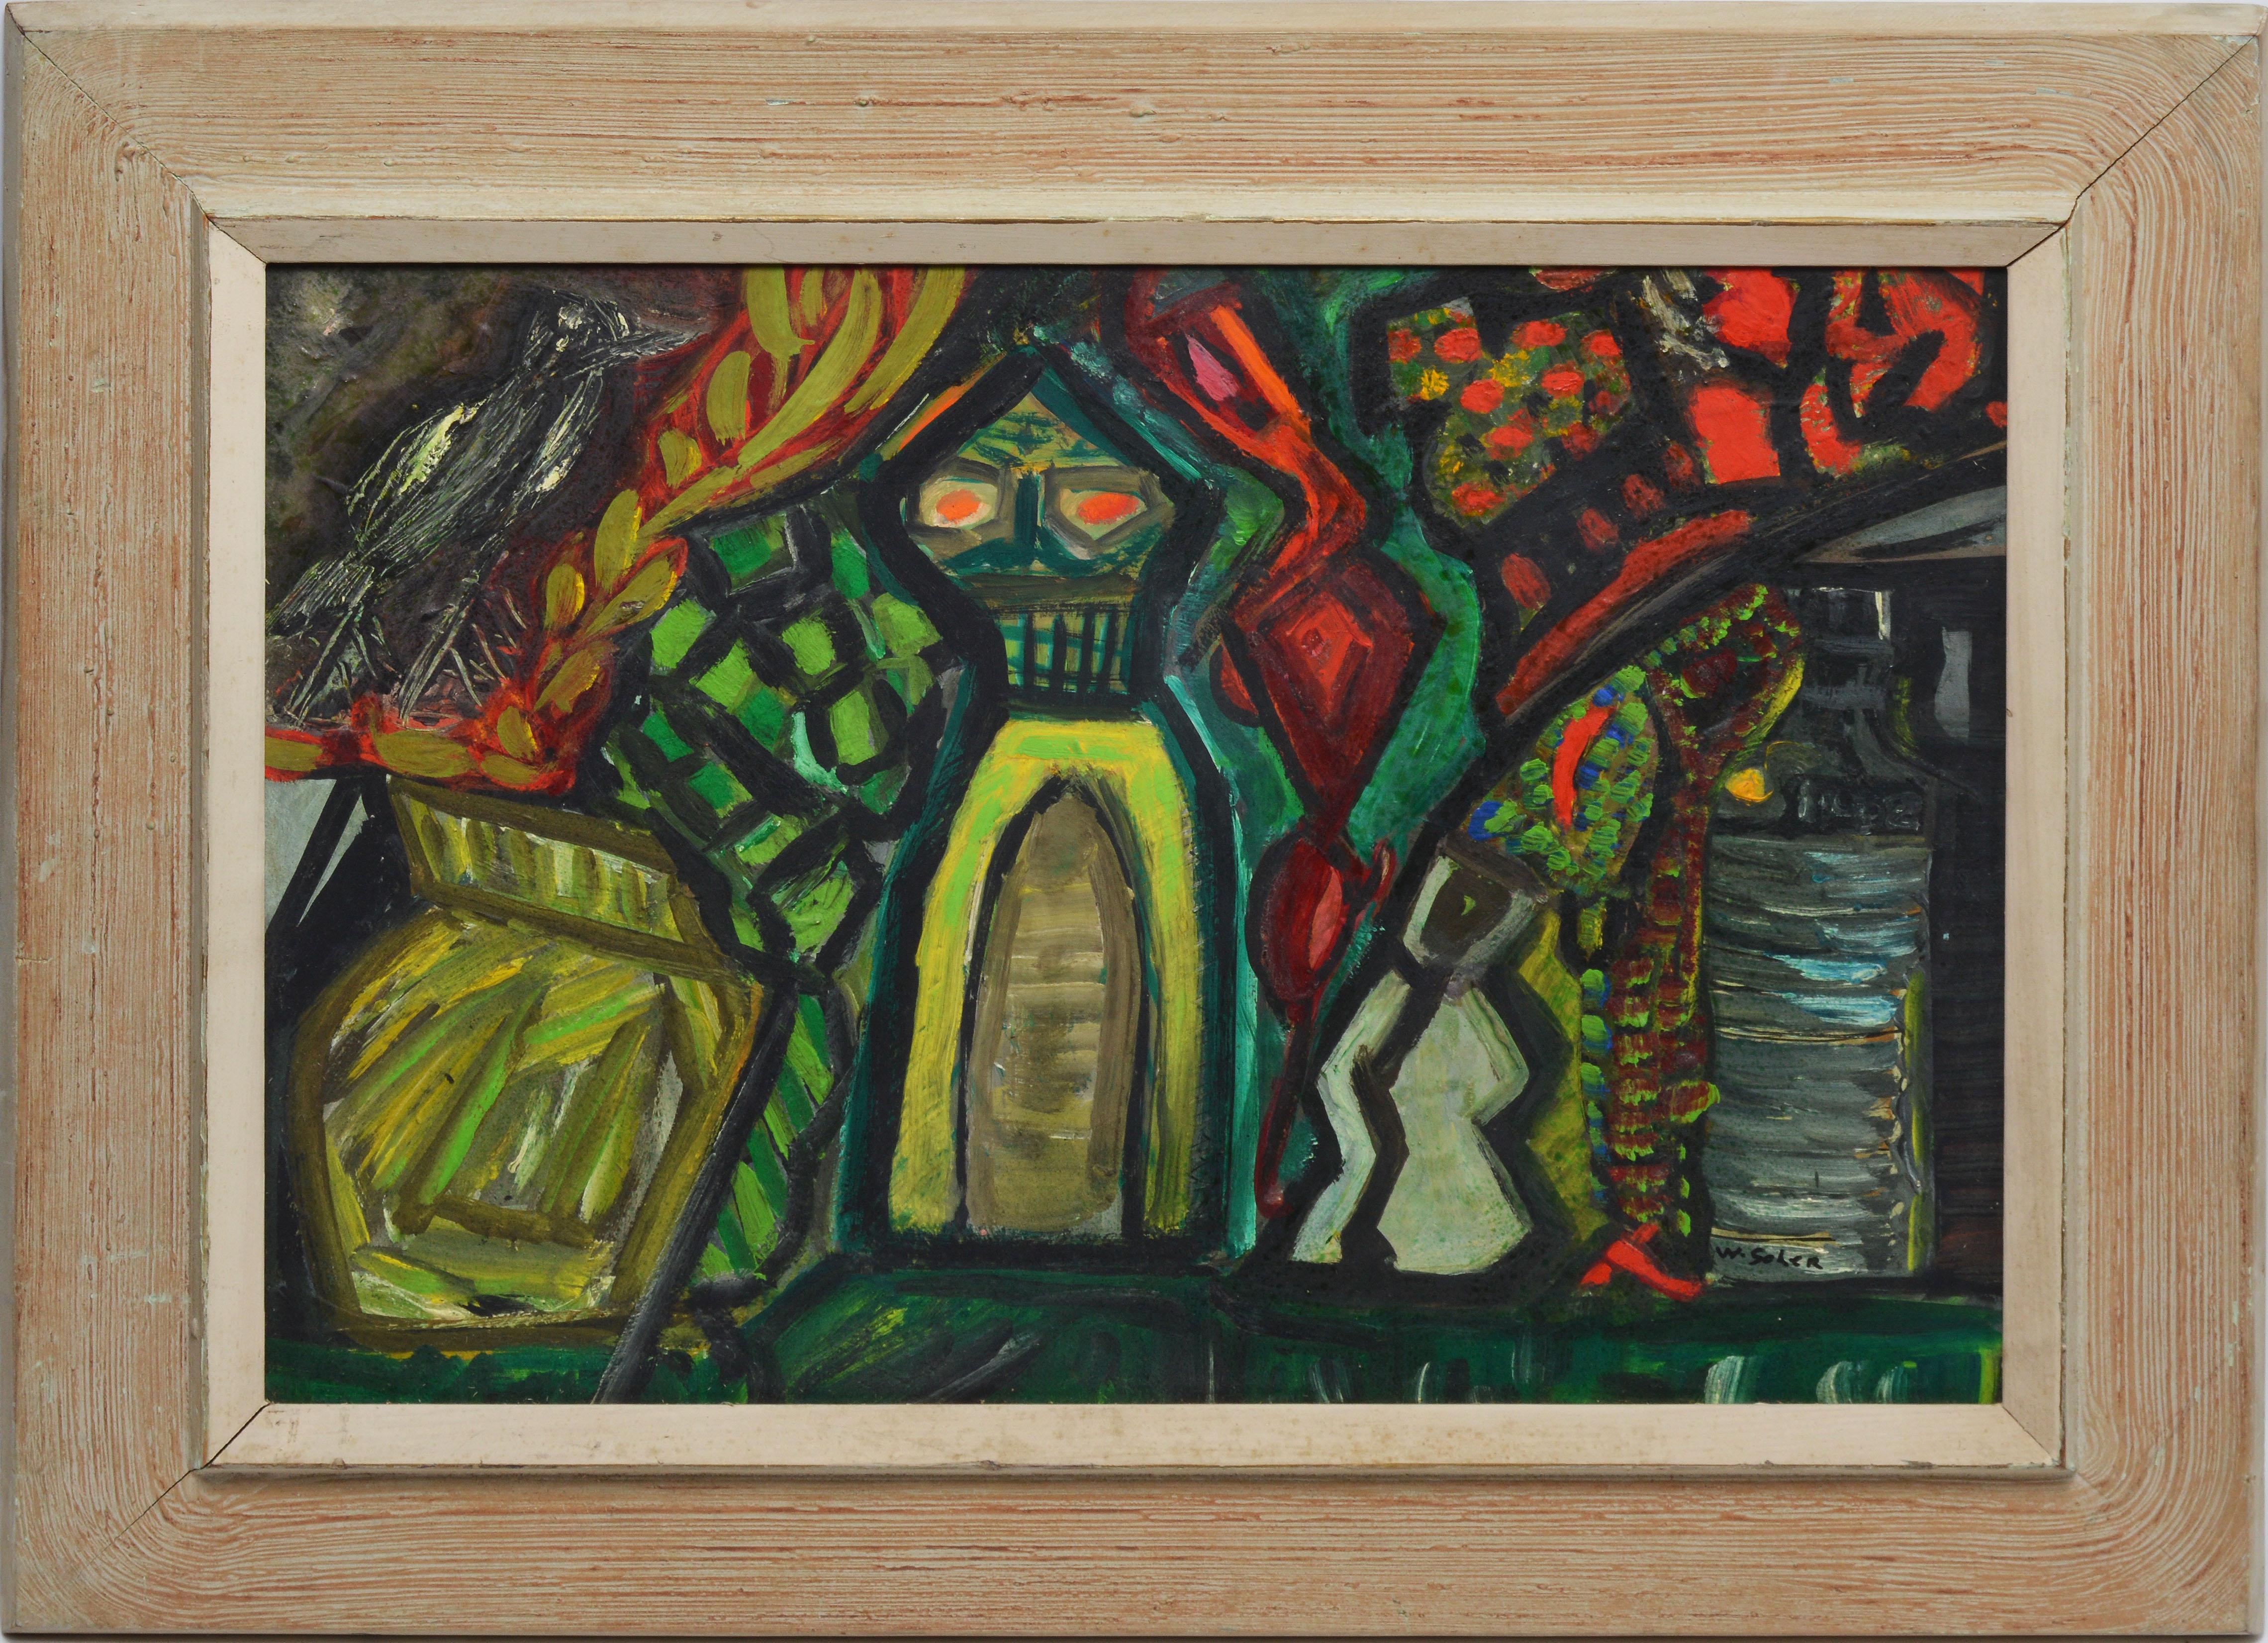 Modernist abstract oil painting  by William Scher.  Oil on board, circa 1940. Signed Scher" lower left. Displayed in a period modernist frame.  Image, 22"L x 16"H, overall 28"L x 22"H.